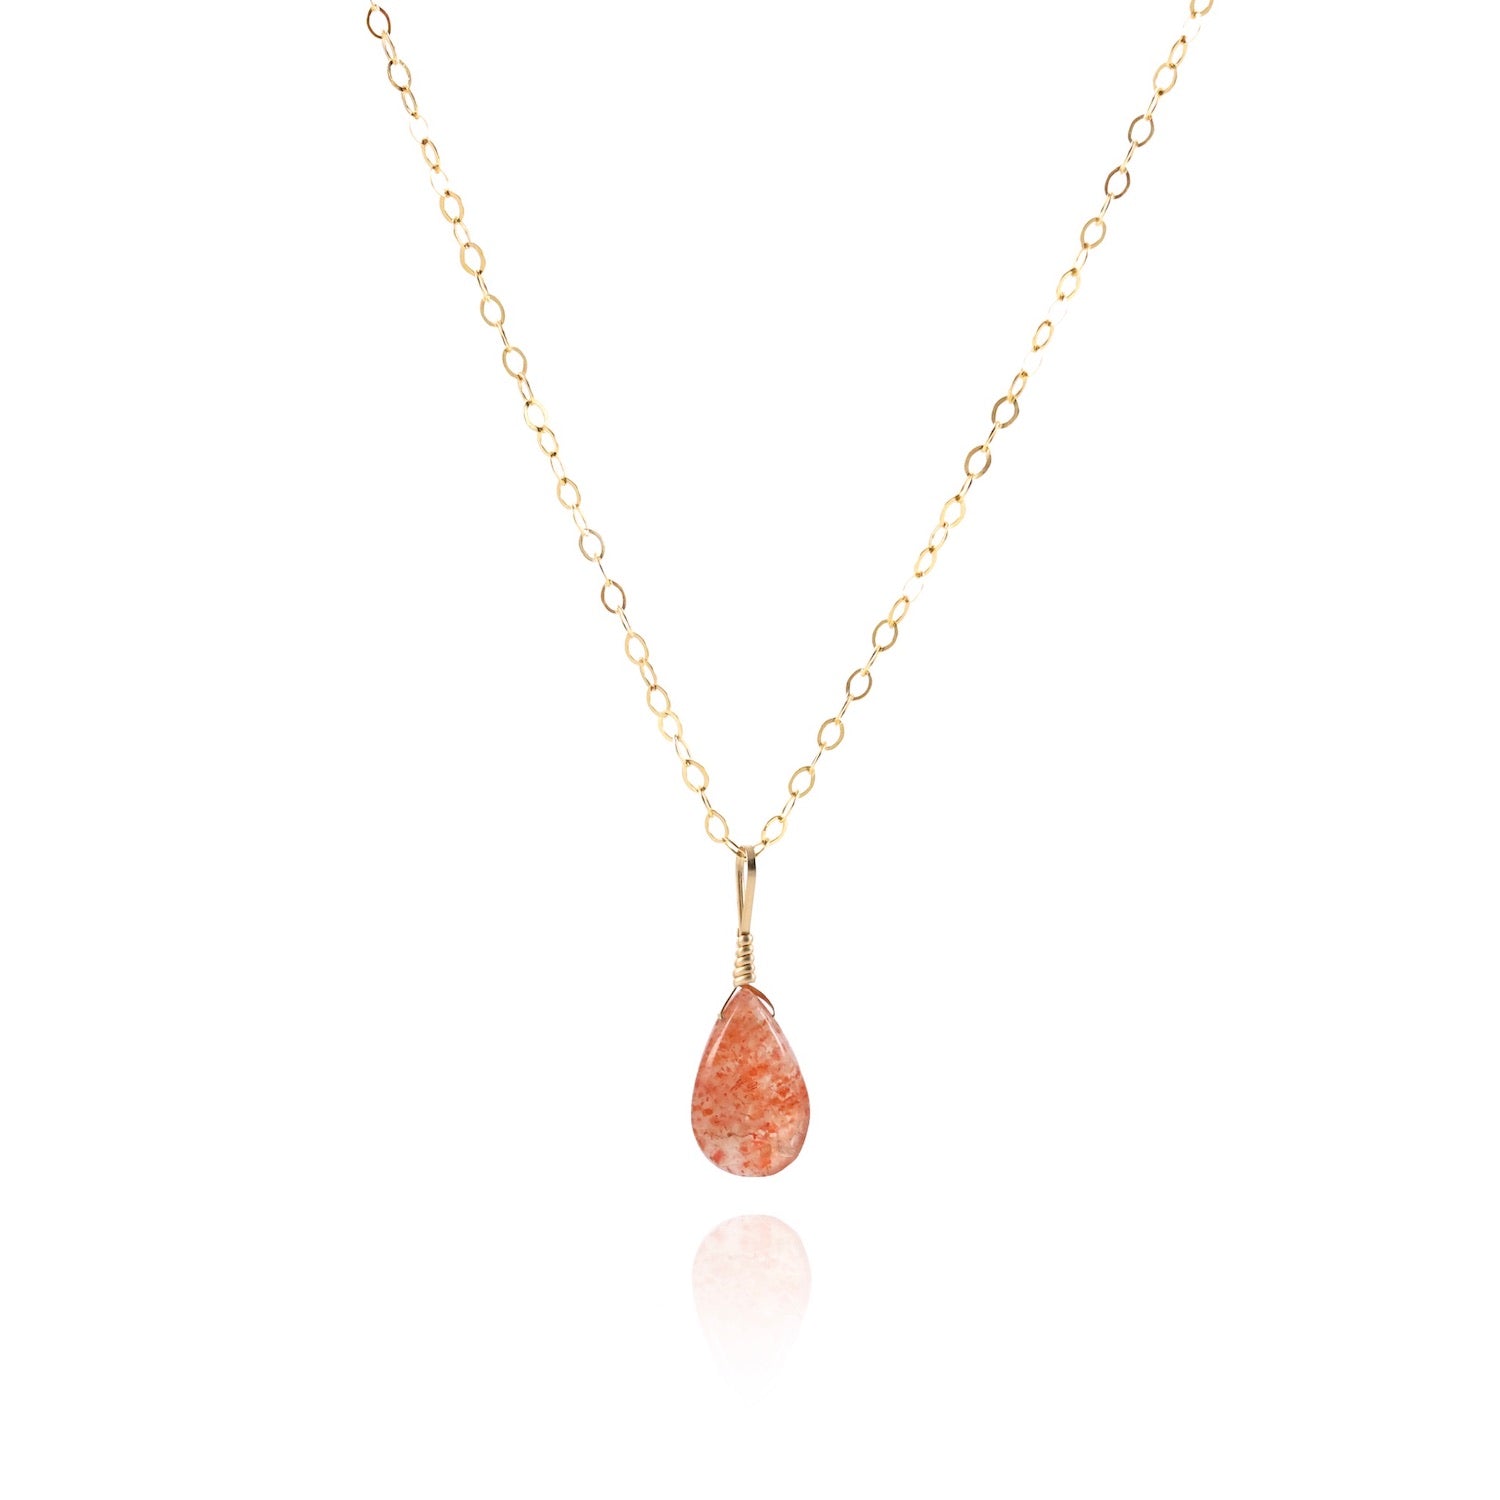 simple dainty sunstone necklace